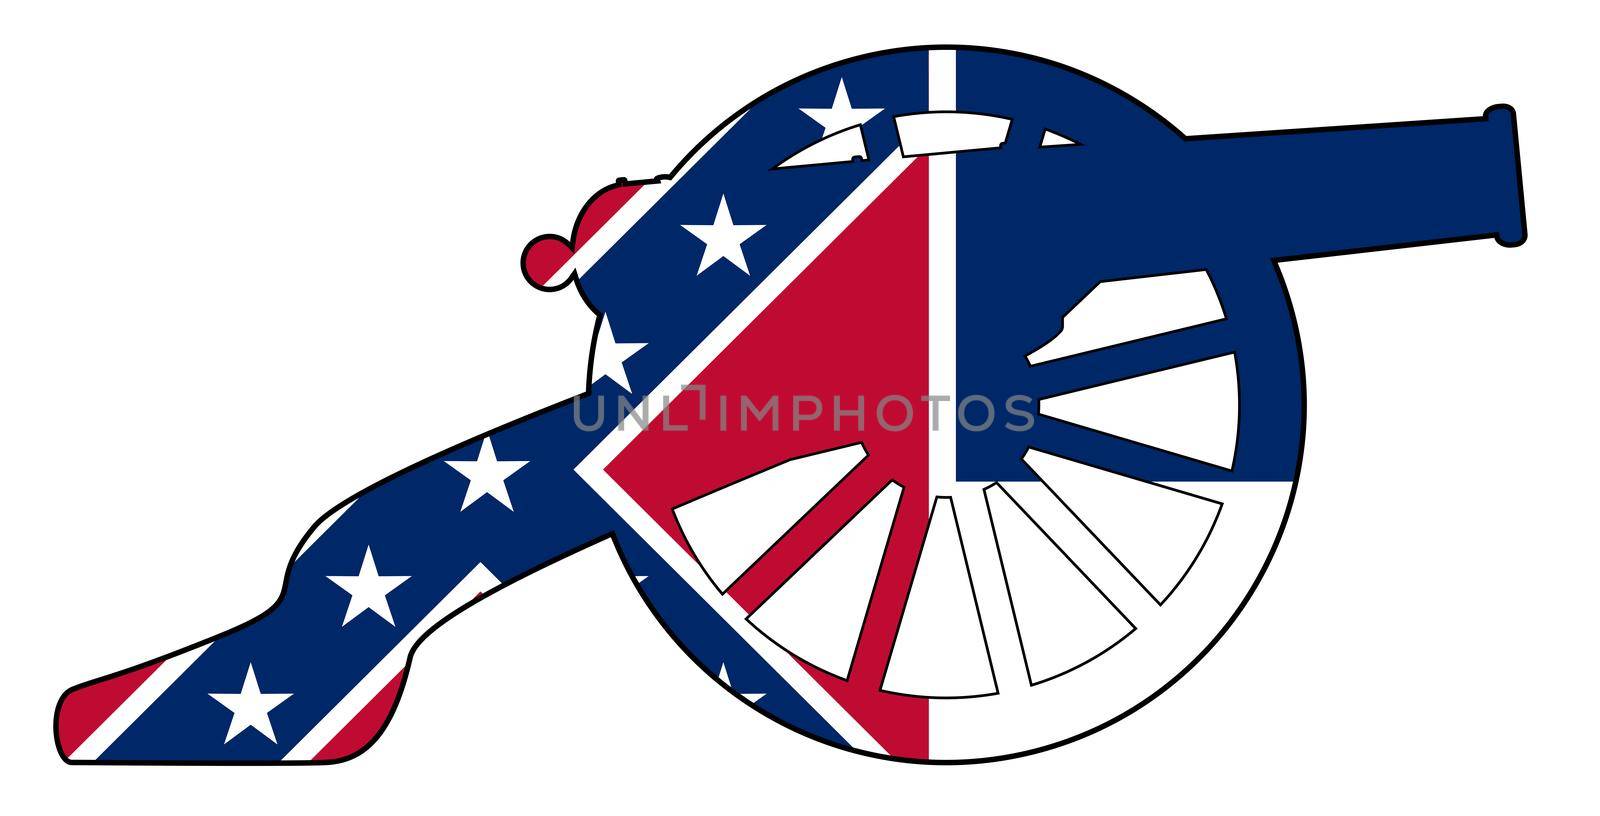 Typical American civil war cannon gun with Mississippi state flag isolated on a white background